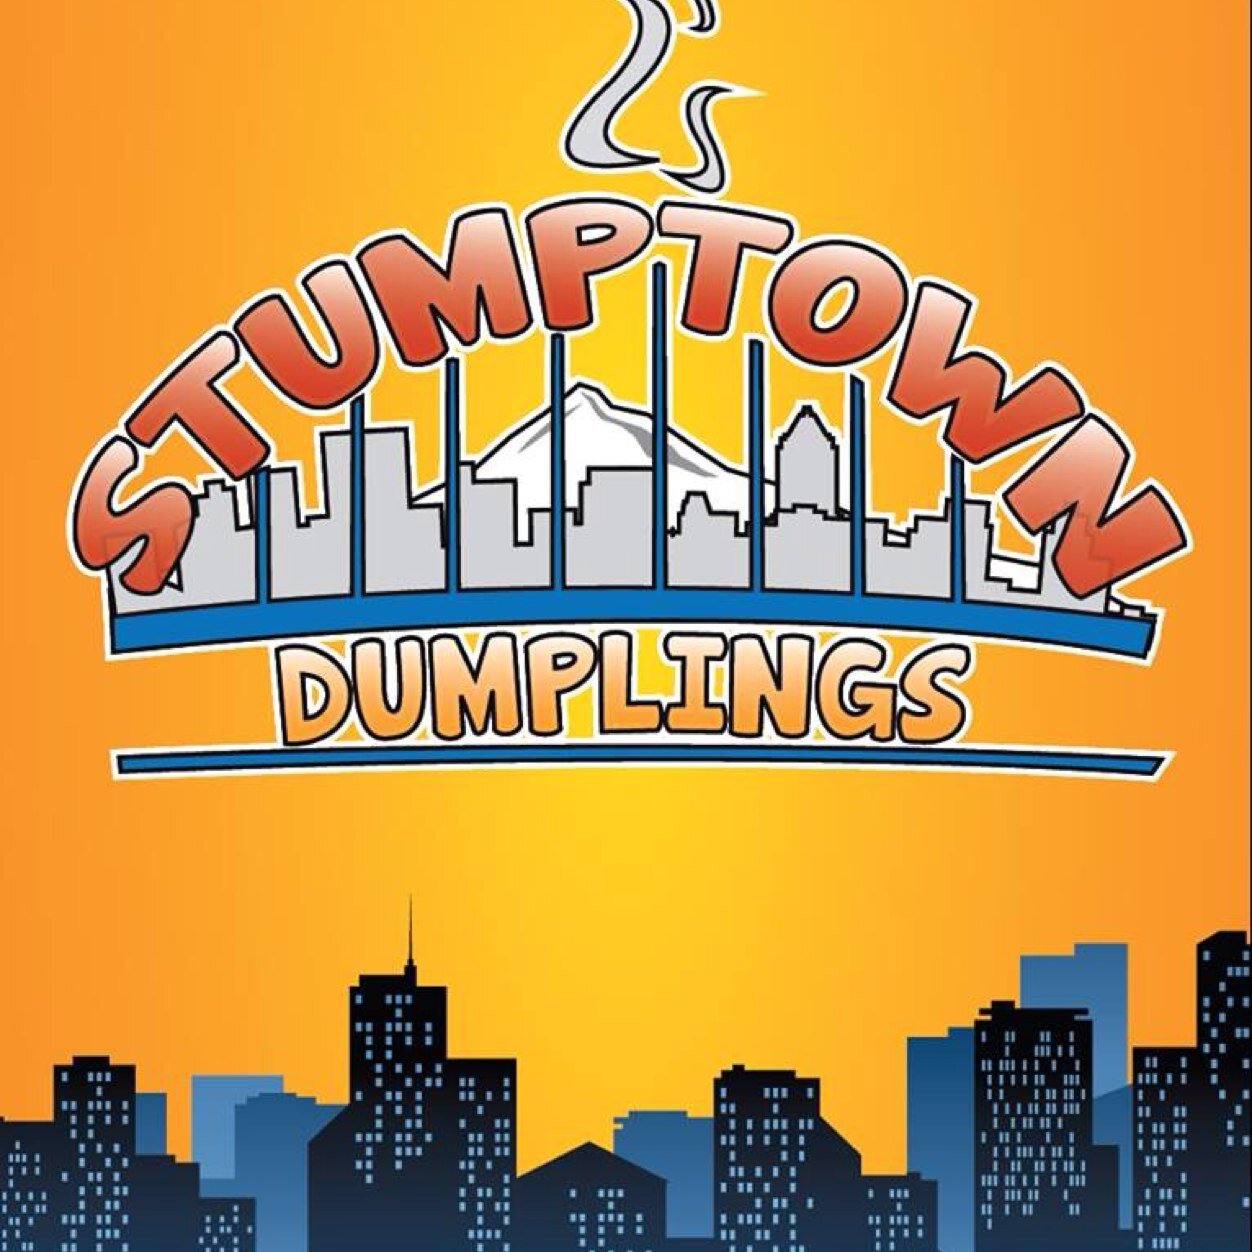 Locations: 1477 NE Alberta St and 231 SW Ankeny St (in the Alley) next to Voodoo Doughnut. Mobile truck available for events, please email info@stumplings.com